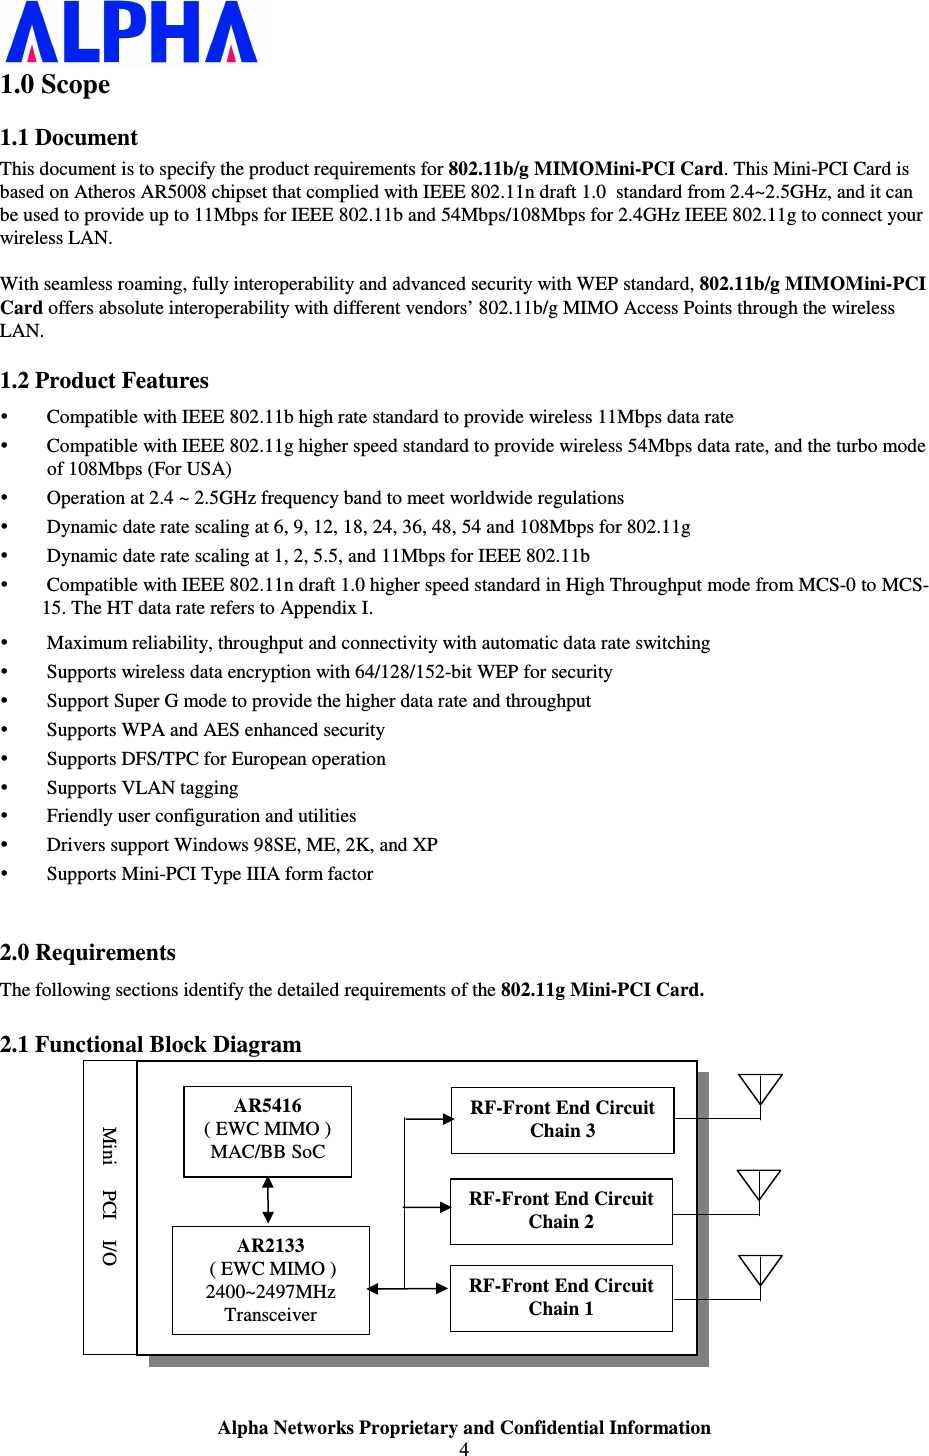                    Alpha Networks Proprietary and Confidential Information 4  1.0 Scope 1.1 Document This document is to specify the product requirements for 802.11b/g MIMOMini-PCI Card. This Mini-PCI Card is based on Atheros AR5008 chipset that complied with IEEE 802.11n draft 1.0  standard from 2.4~2.5GHz, and it can be used to provide up to 11Mbps for IEEE 802.11b and 54Mbps/108Mbps for 2.4GHz IEEE 802.11g to connect your wireless LAN.  With seamless roaming, fully interoperability and advanced security with WEP standard, 802.11b/g MIMOMini-PCI Card offers absolute interoperability with different vendors’ 802.11b/g MIMO Access Points through the wireless LAN. 1.2 Product Features  Compatible with IEEE 802.11b high rate standard to provide wireless 11Mbps data rate  Compatible with IEEE 802.11g higher speed standard to provide wireless 54Mbps data rate, and the turbo mode of 108Mbps (For USA)  Operation at 2.4 ~ 2.5GHz frequency band to meet worldwide regulations  Dynamic date rate scaling at 6, 9, 12, 18, 24, 36, 48, 54 and 108Mbps for 802.11g  Dynamic date rate scaling at 1, 2, 5.5, and 11Mbps for IEEE 802.11b  Compatible with IEEE 802.11n draft 1.0 higher speed standard in High Throughput mode from MCS-0 to MCS-15. The HT data rate refers to Appendix I.  Maximum reliability, throughput and connectivity with automatic data rate switching  Supports wireless data encryption with 64/128/152-bit WEP for security  Support Super G mode to provide the higher data rate and throughput  Supports WPA and AES enhanced security   Supports DFS/TPC for European operation  Supports VLAN tagging  Friendly user configuration and utilities  Drivers support Windows 98SE, ME, 2K, and XP  Supports Mini-PCI Type IIIA form factor  2.0 Requirements The following sections identify the detailed requirements of the 802.11g Mini-PCI Card. 2.1 Functional Block Diagram    AR5416 ( EWC MIMO ) MAC/BB SoC AR2133  ( EWC MIMO ) 2400~2497MHz Transceiver RF-Front End Circuit Chain 1  RF-Front End Circuit Chain 2  RF-Front End Circuit Chain 3  Mini     PCI    I/O 